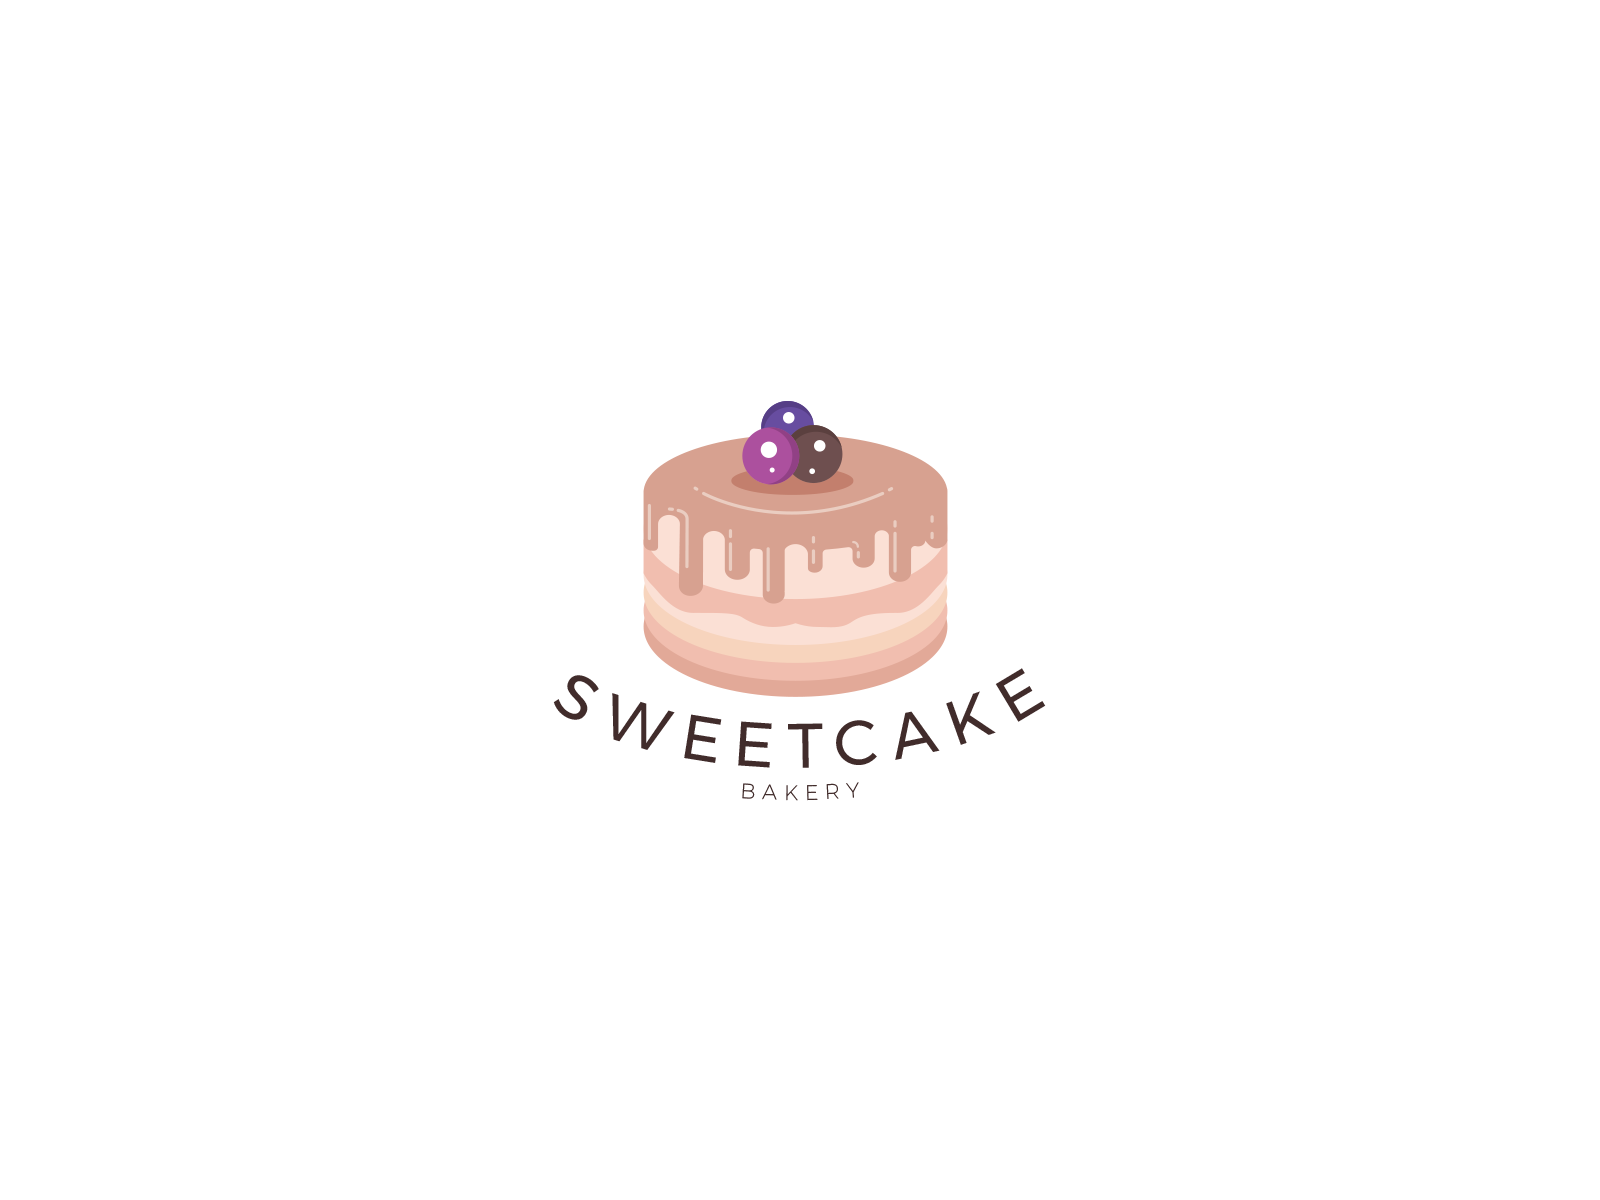 Cake Bakery Logo Design Ilustration Royalty Free SVG, Cliparts, Vectors,  and Stock Illustration. Image 150320981.